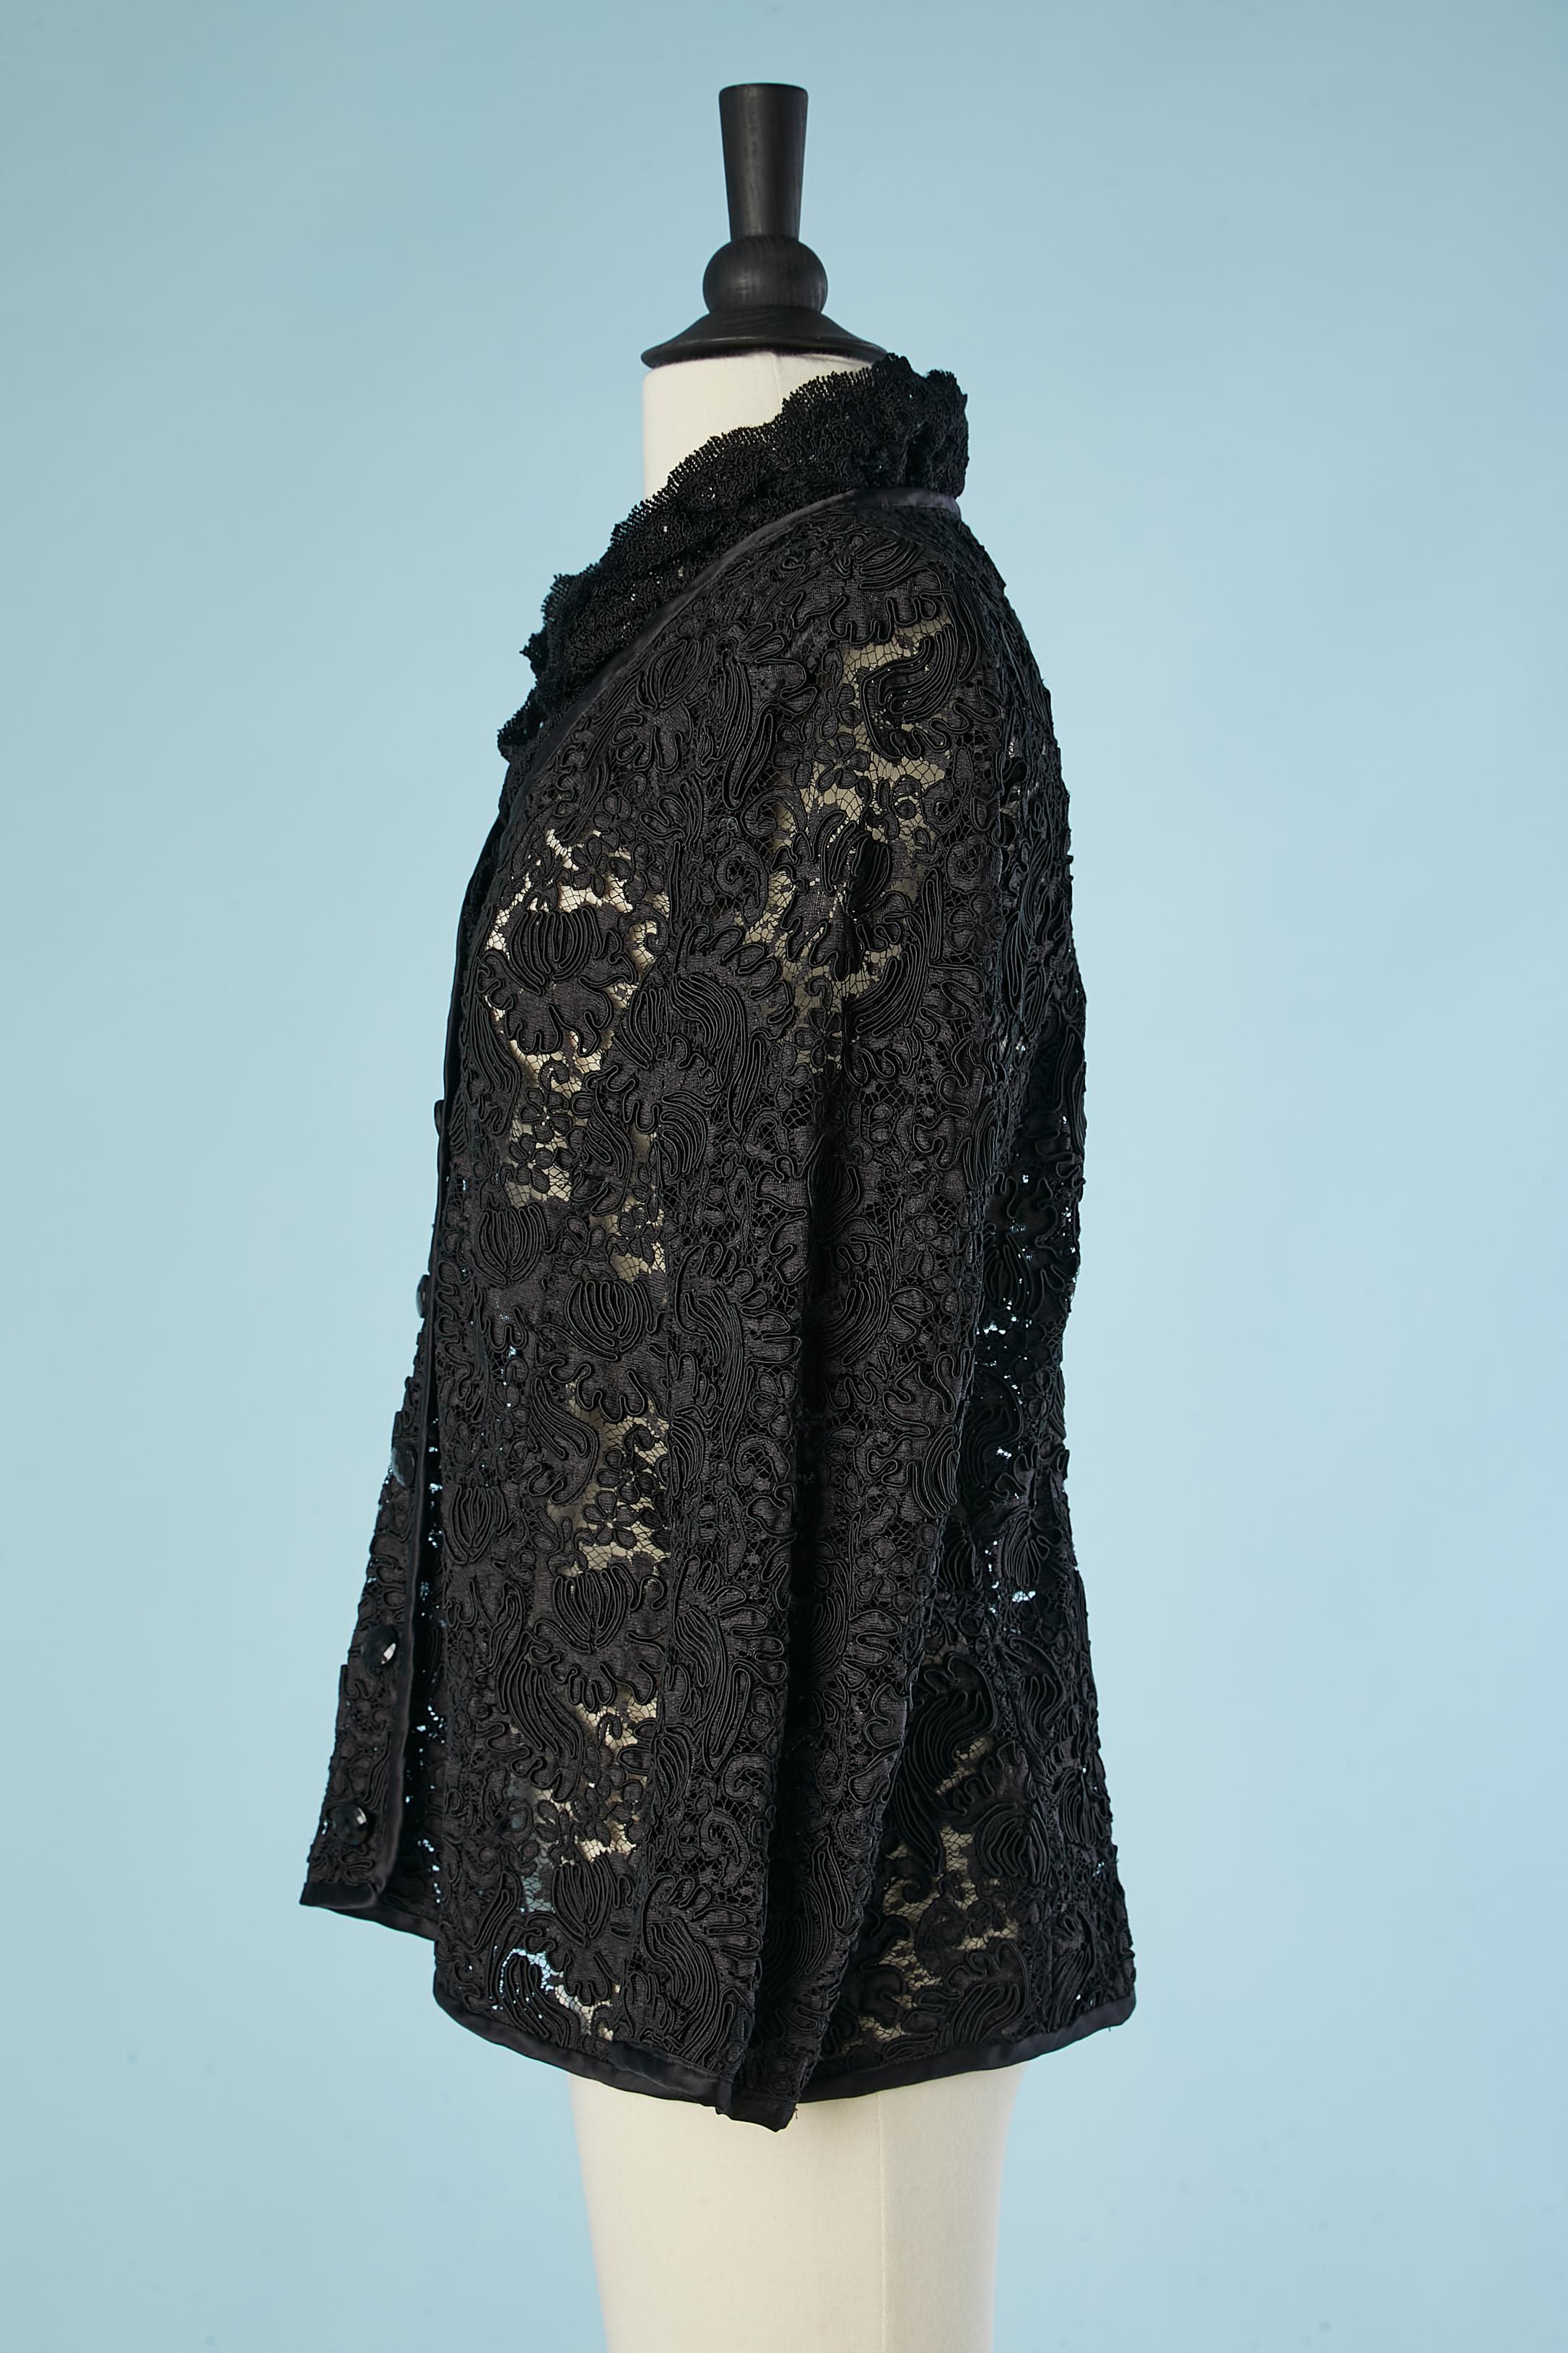  Black guipure evening jacket with ruffle collar YSL Rive Gauche  For Sale 1